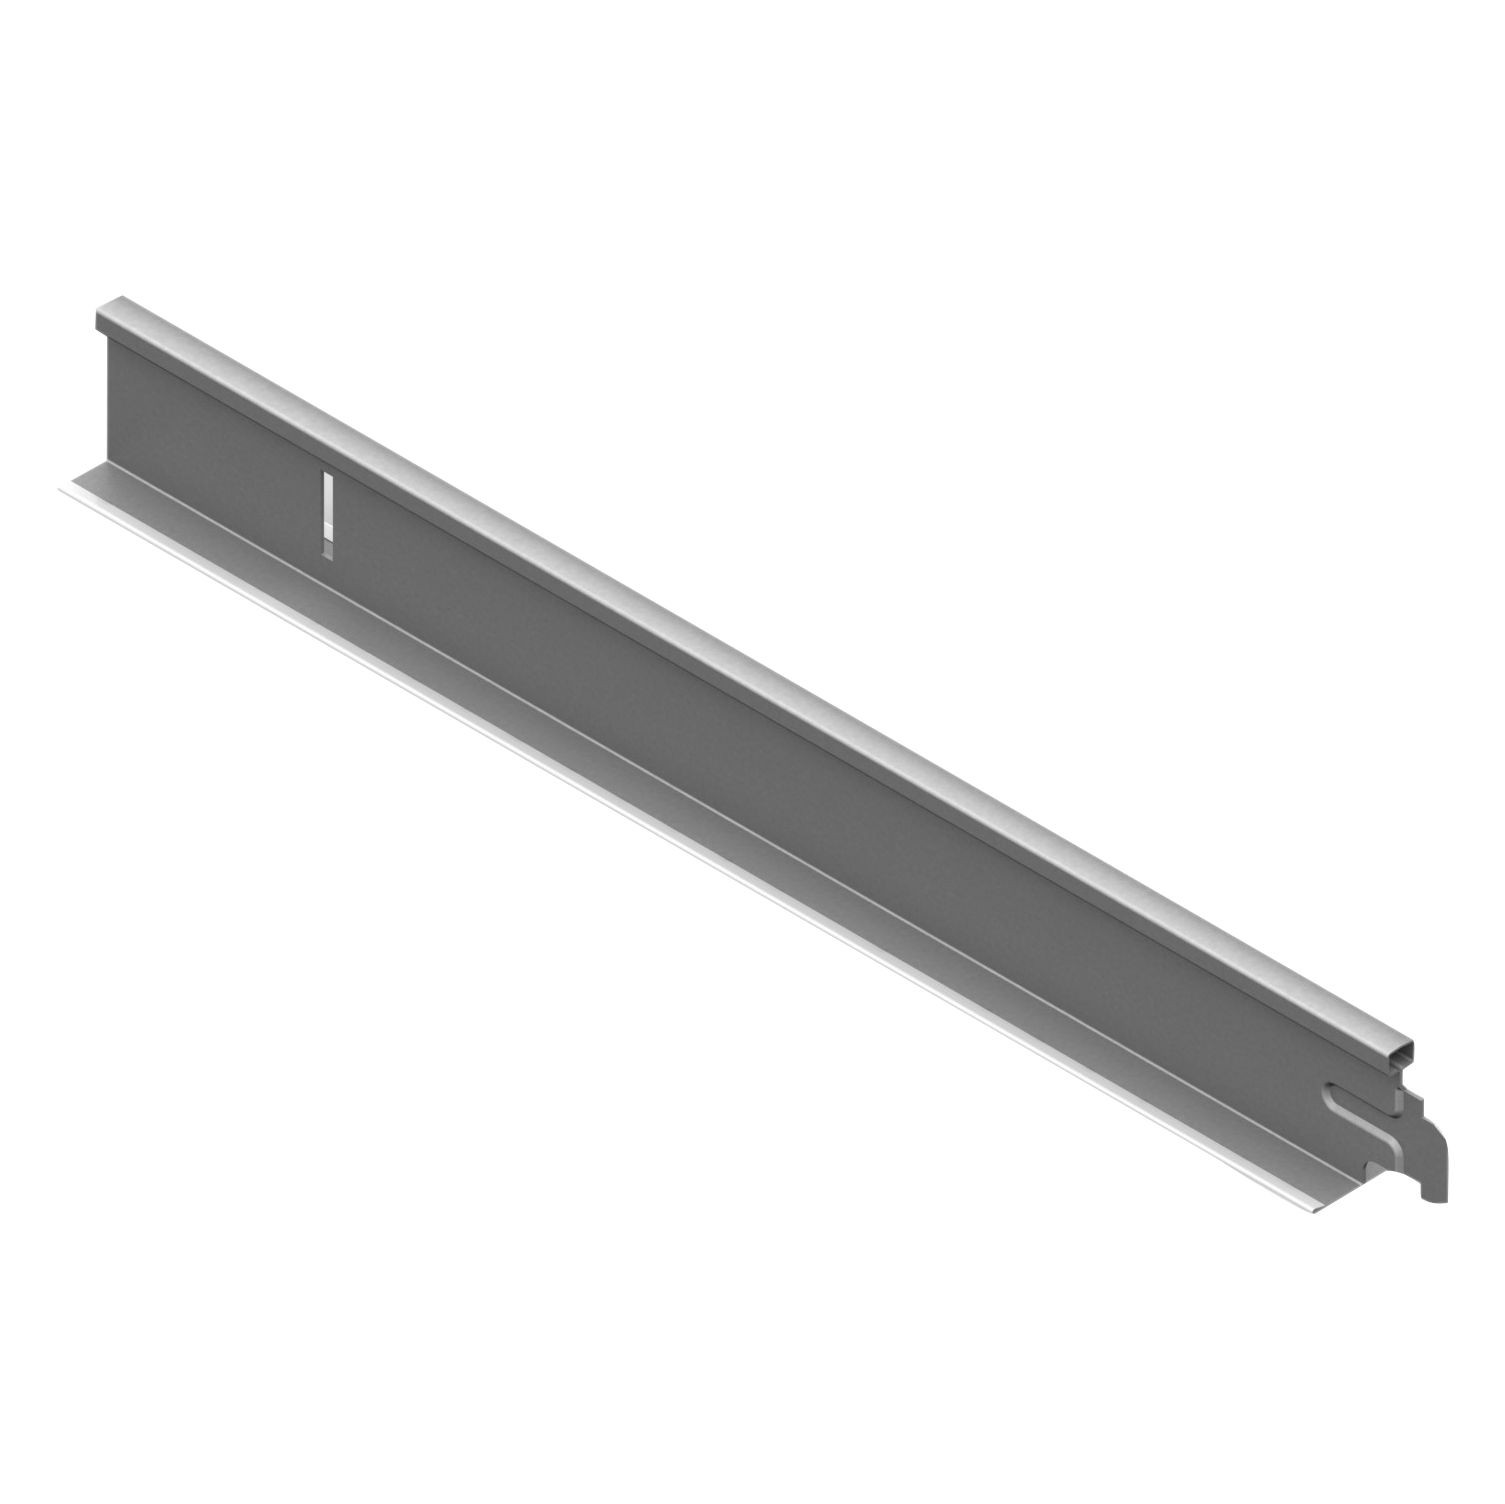 Accessories for cassette ceilings - Secondary profile for Rigips Quick Lock 24 x 1200 mm box ceiling, maxbau.ro